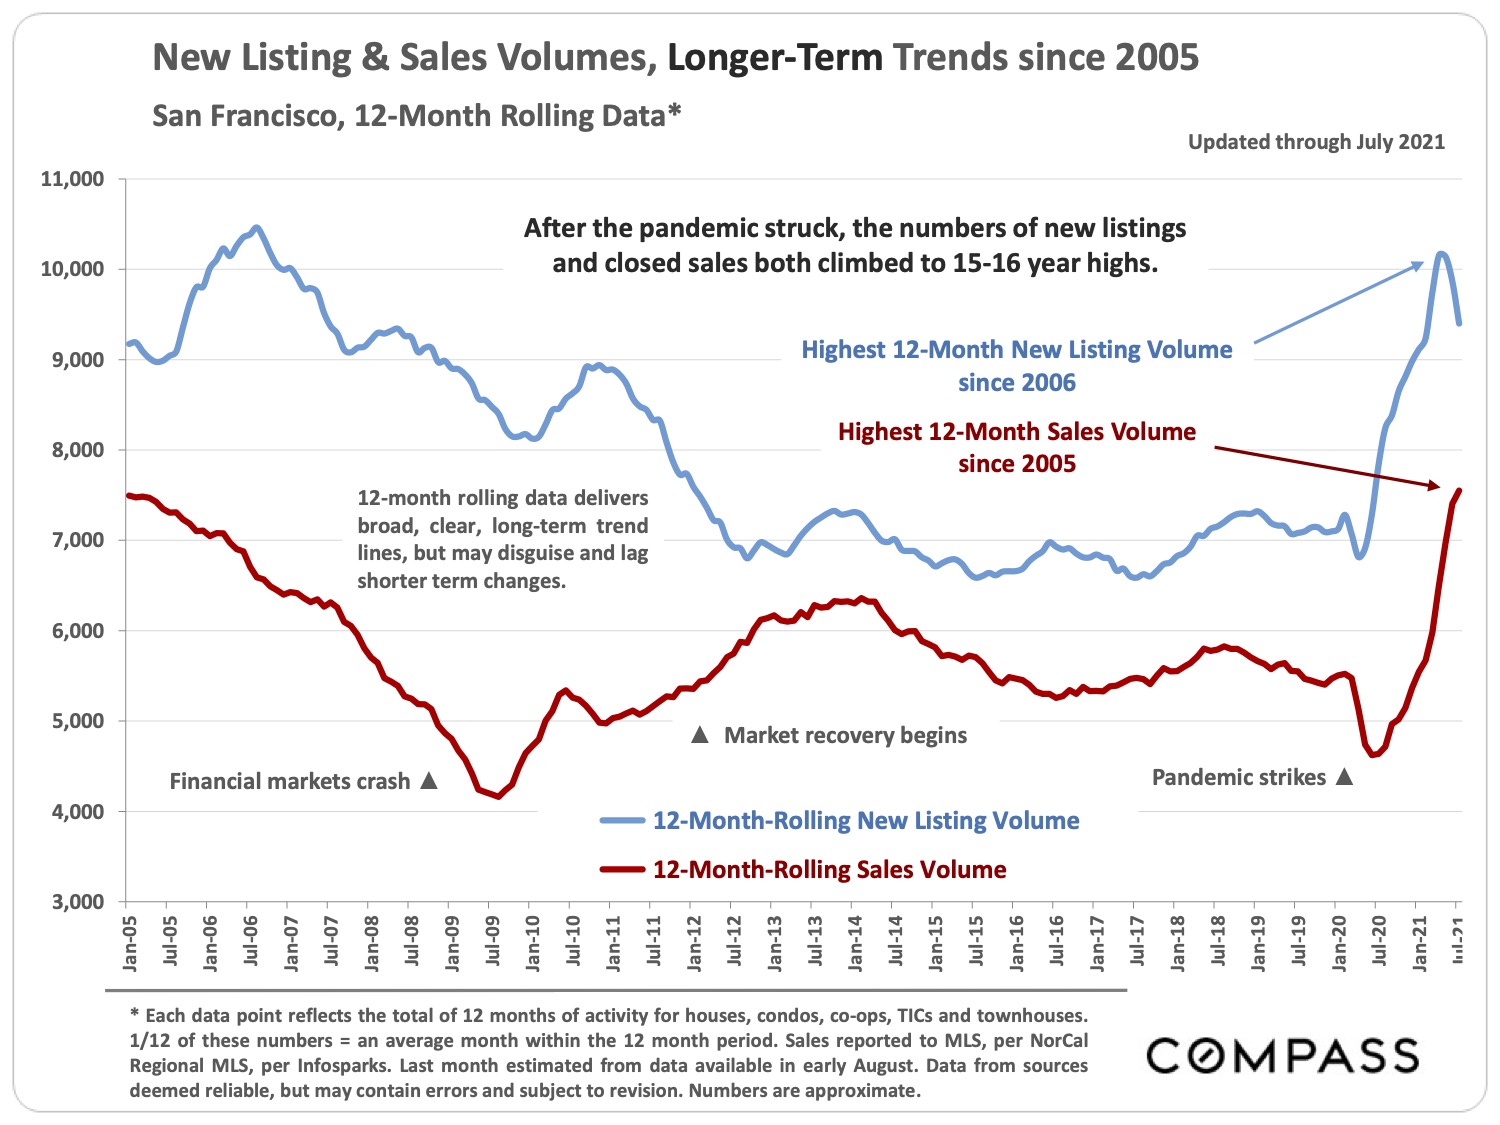 Image of New Listing & Sales Volumes Longer Term Trends since 2005 San Francisco 12 Month Rolling Data